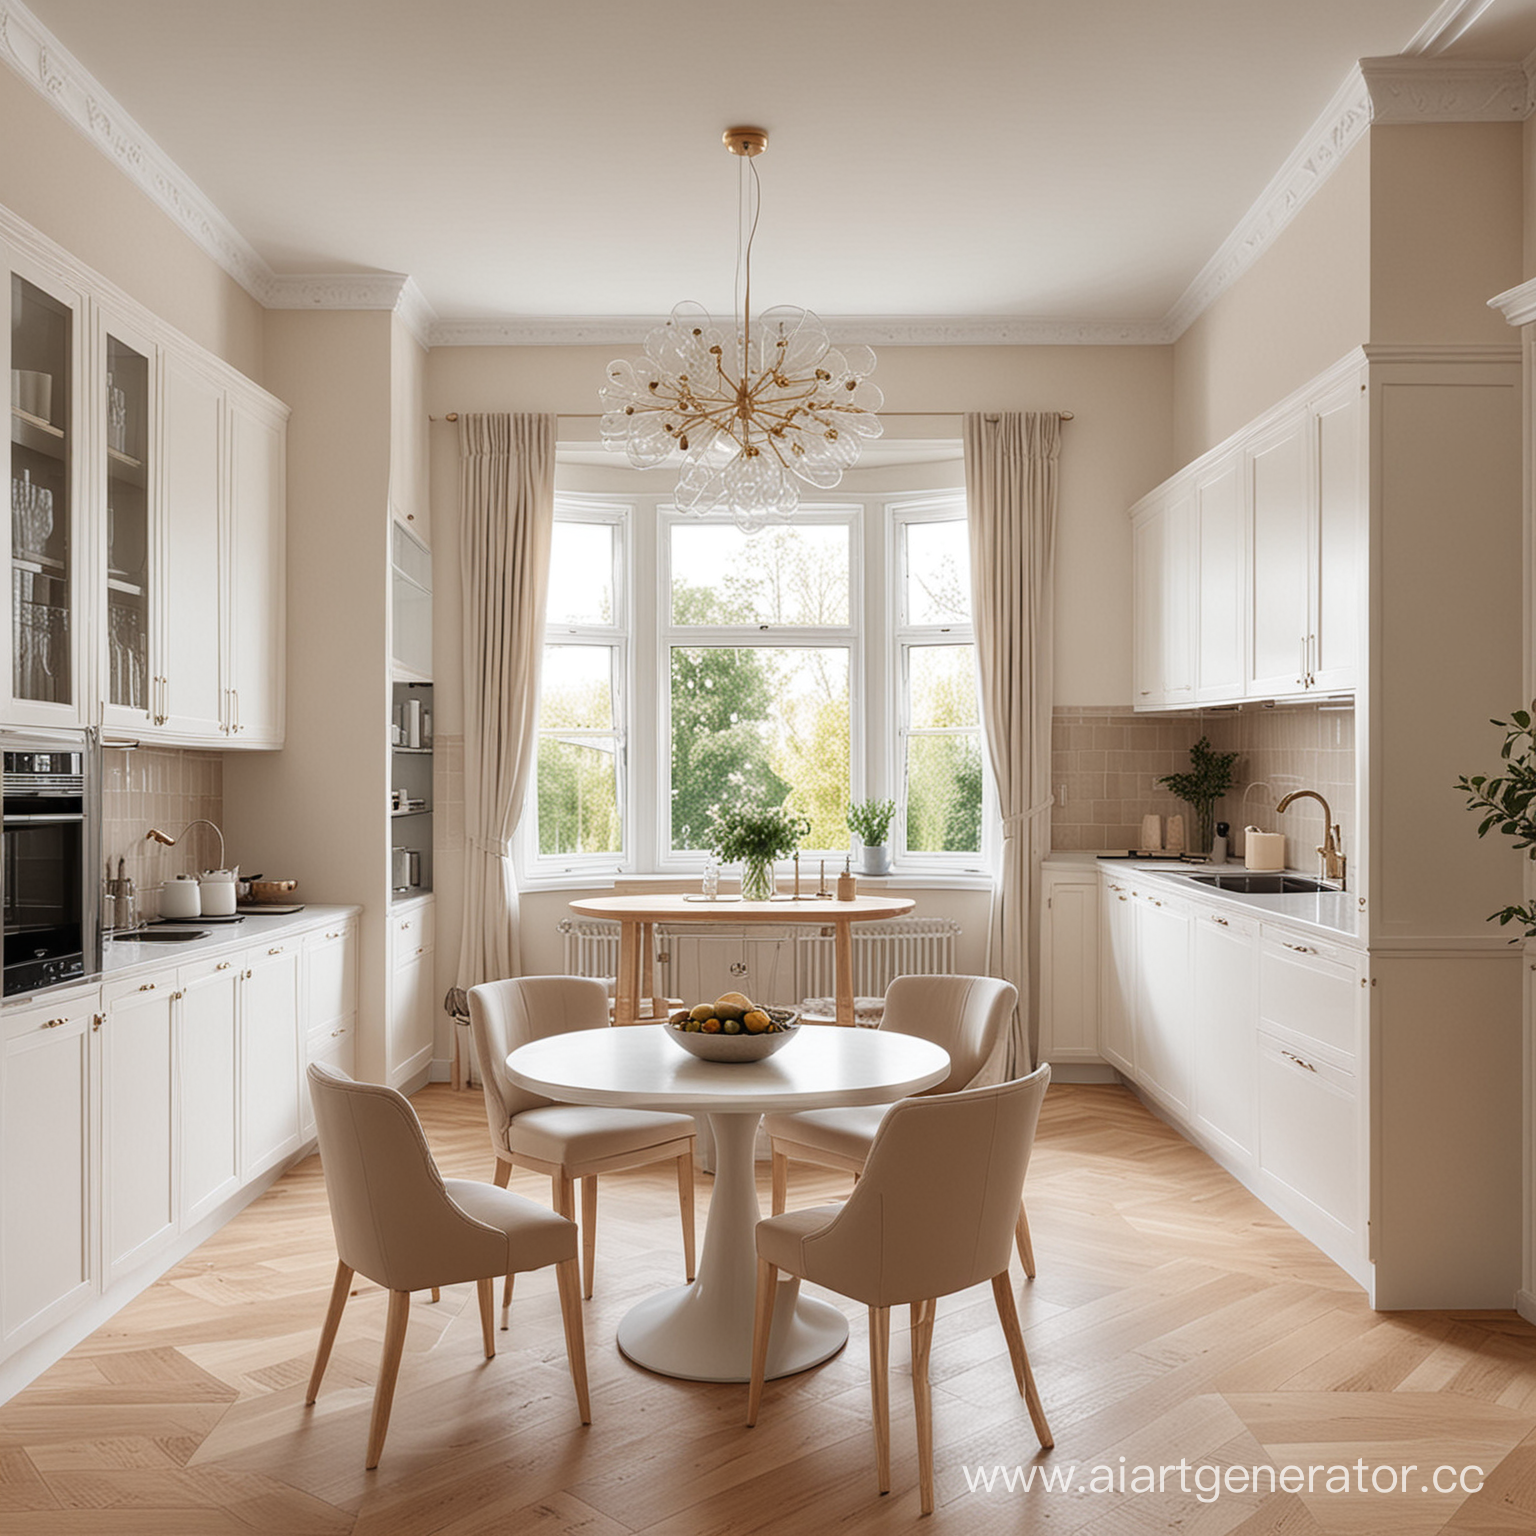 kitchen design in white and beige tones with a round kitchen table , high glass cabinets , wooden floor